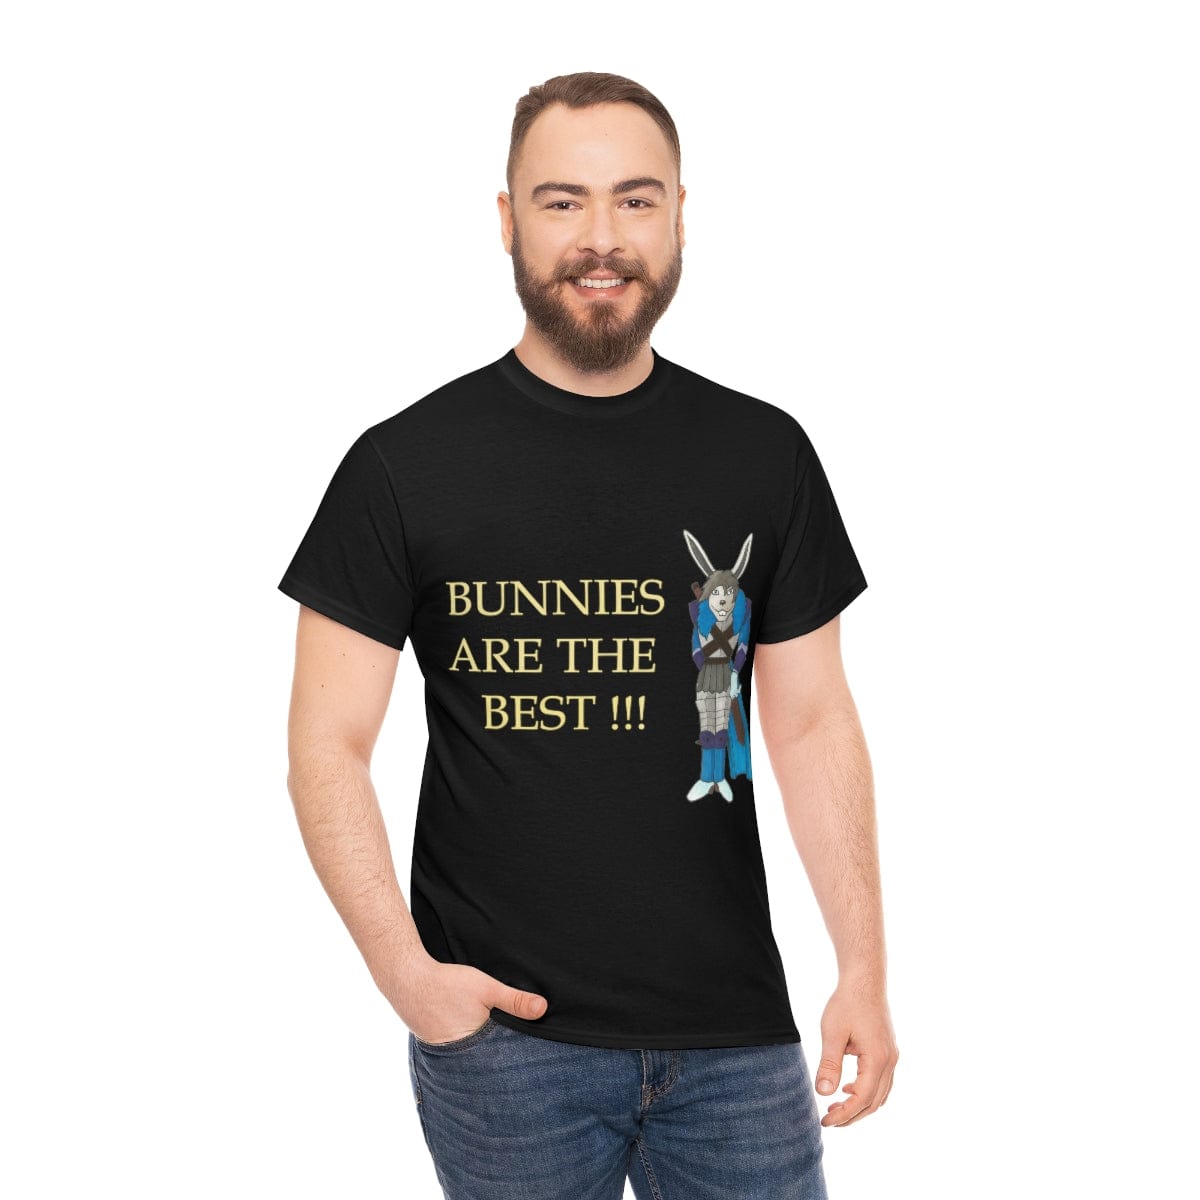 Bunnies are the best!!! T-shirt